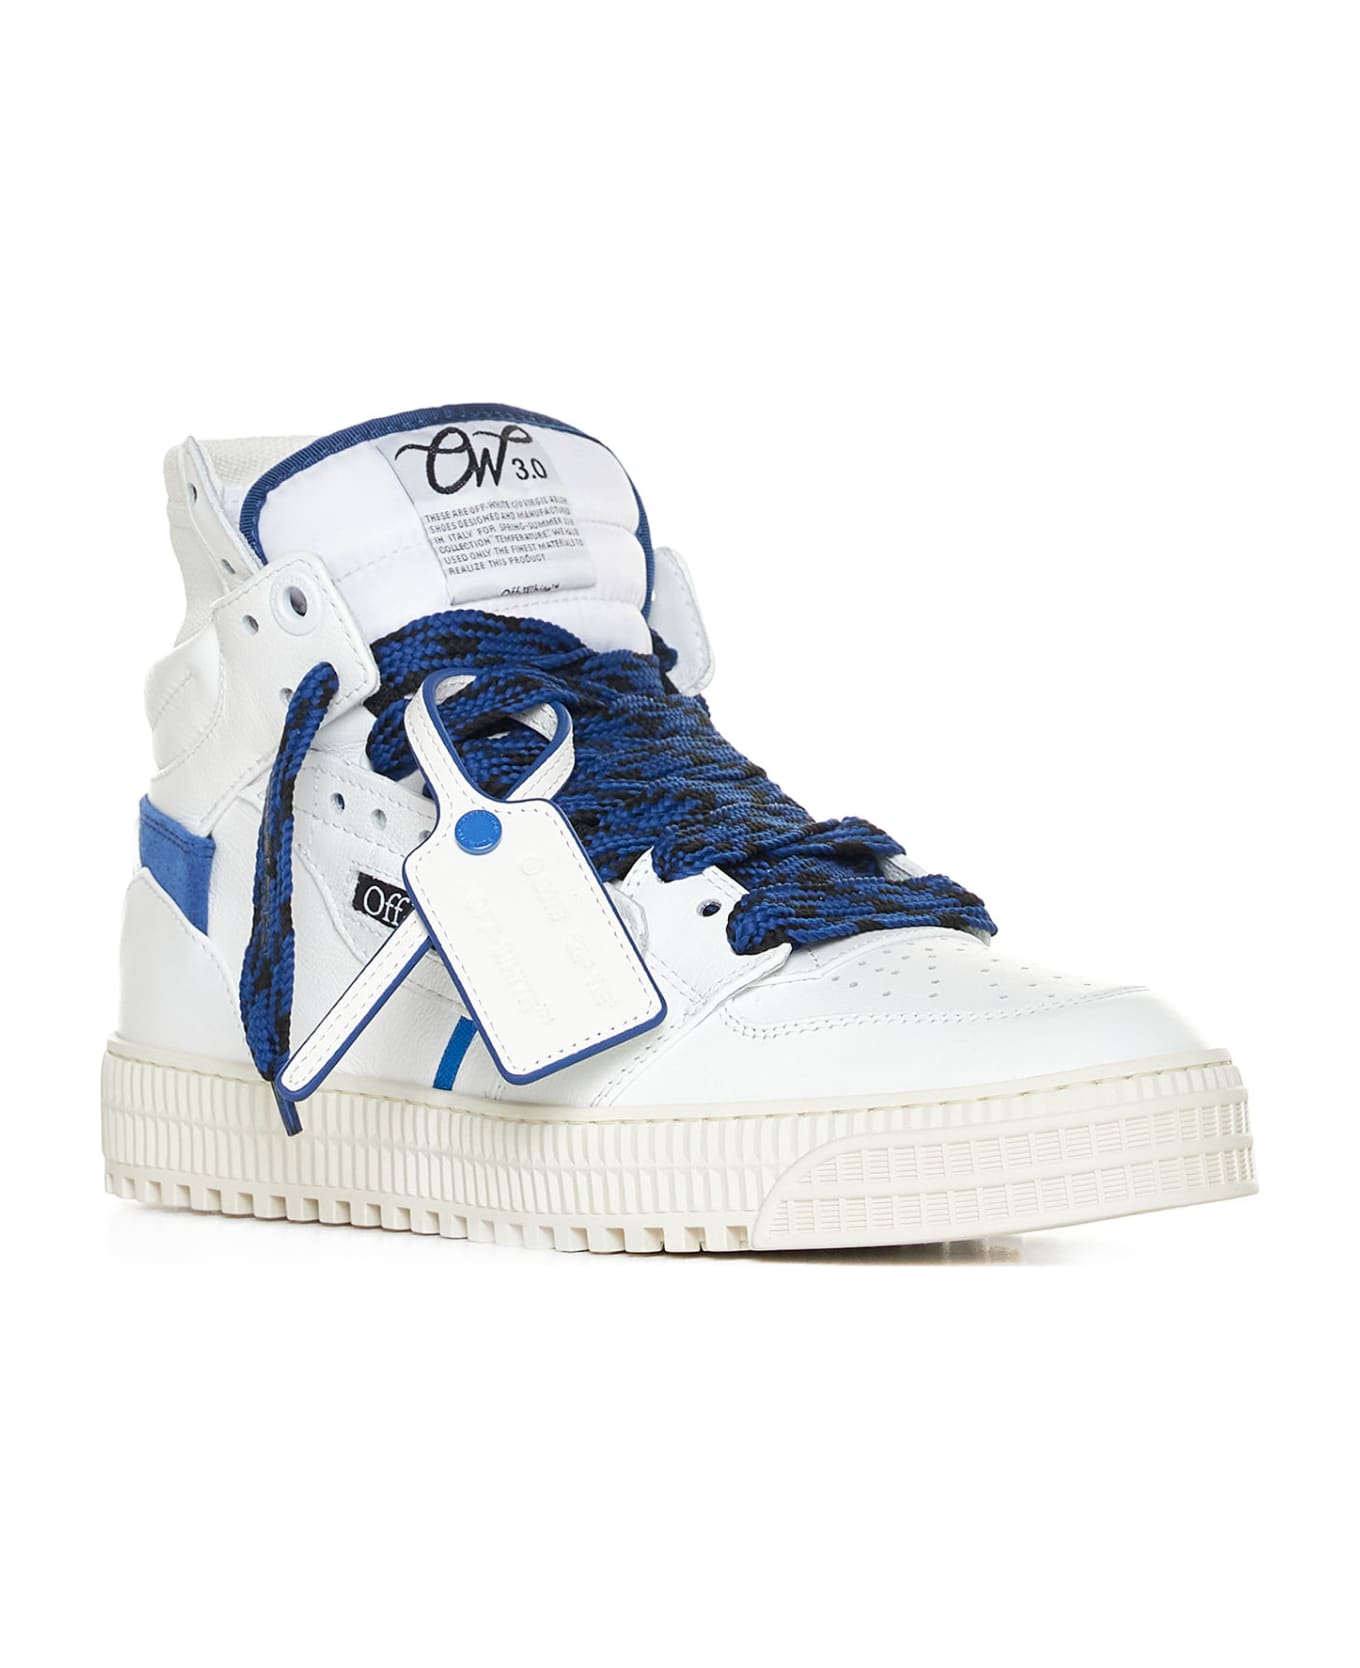 Off-White Sneakers - White navy blue